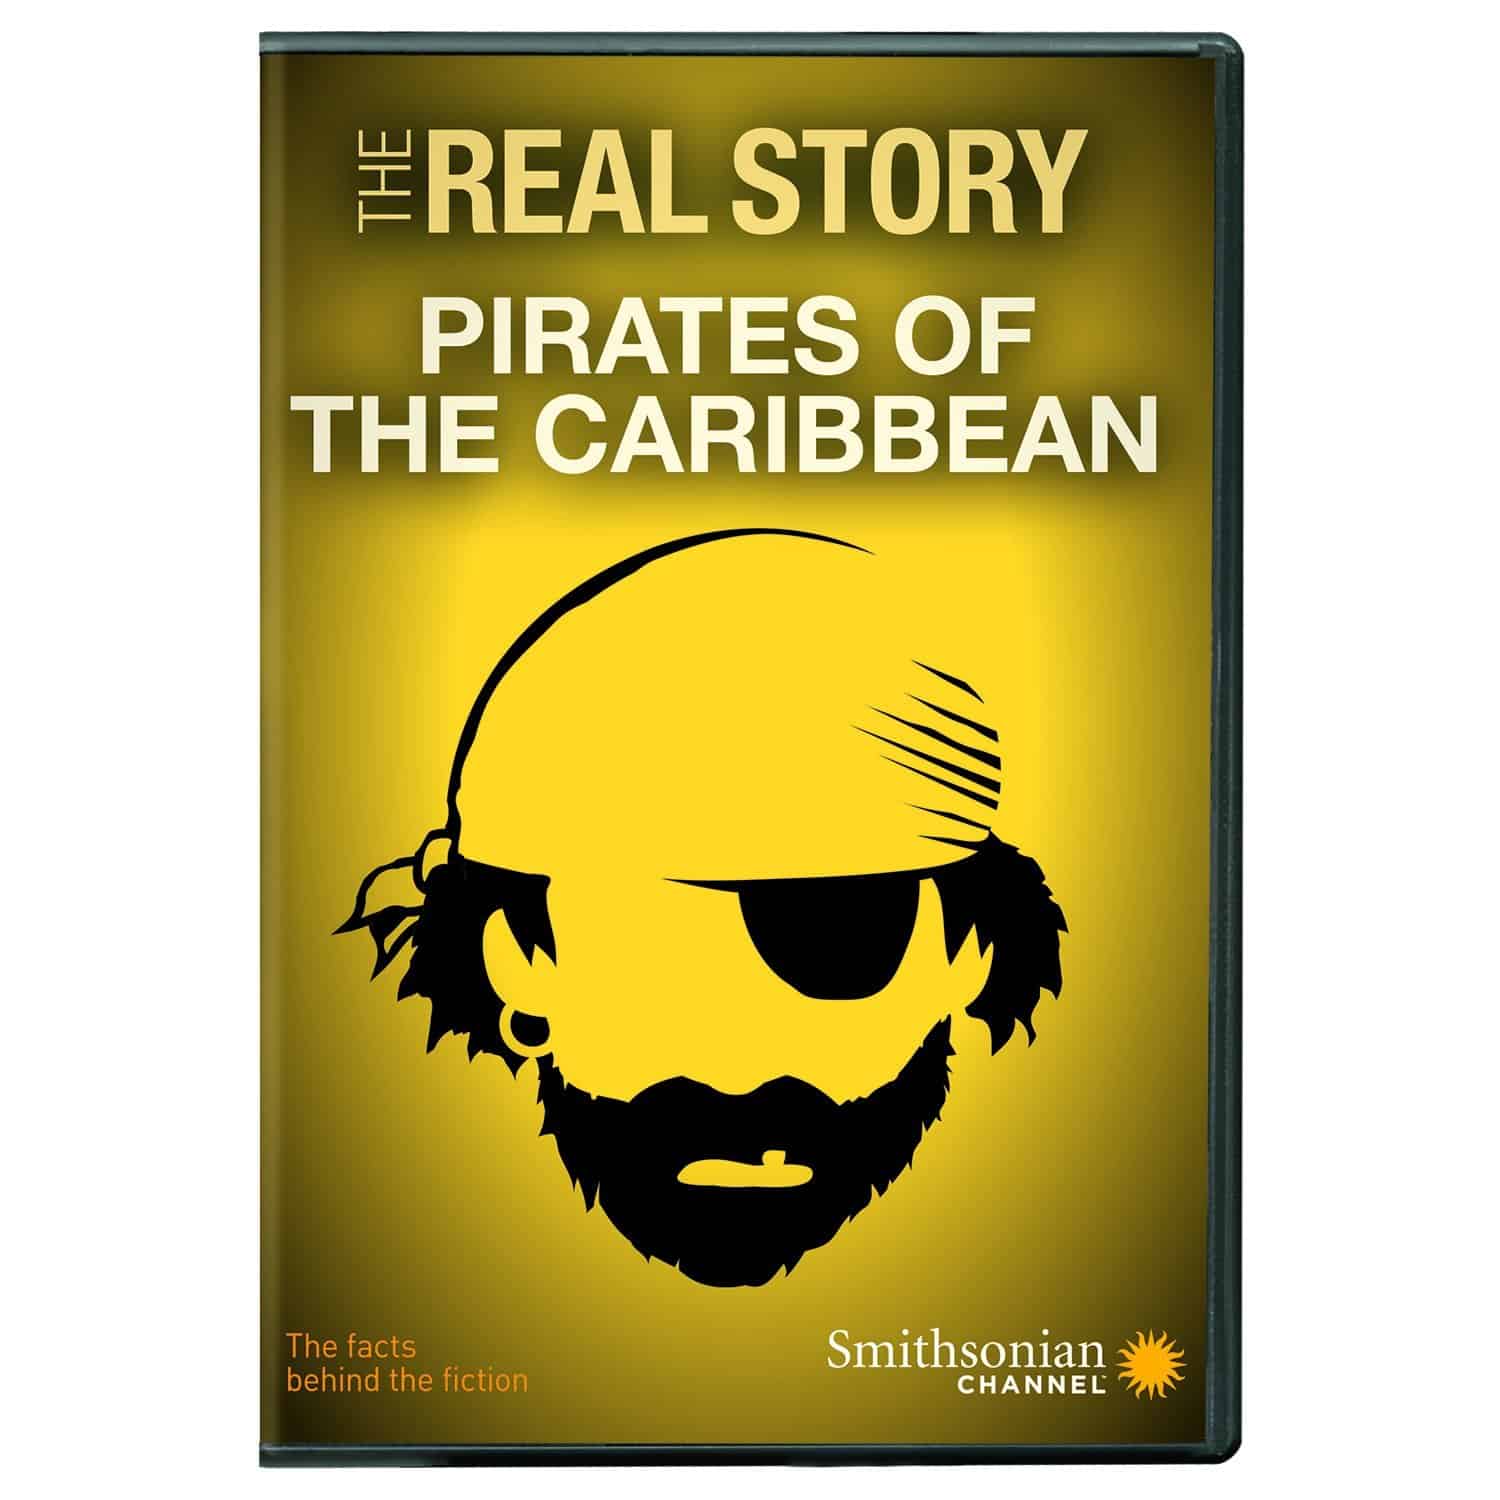 The Real Story Pirates of the Caribbean DVD